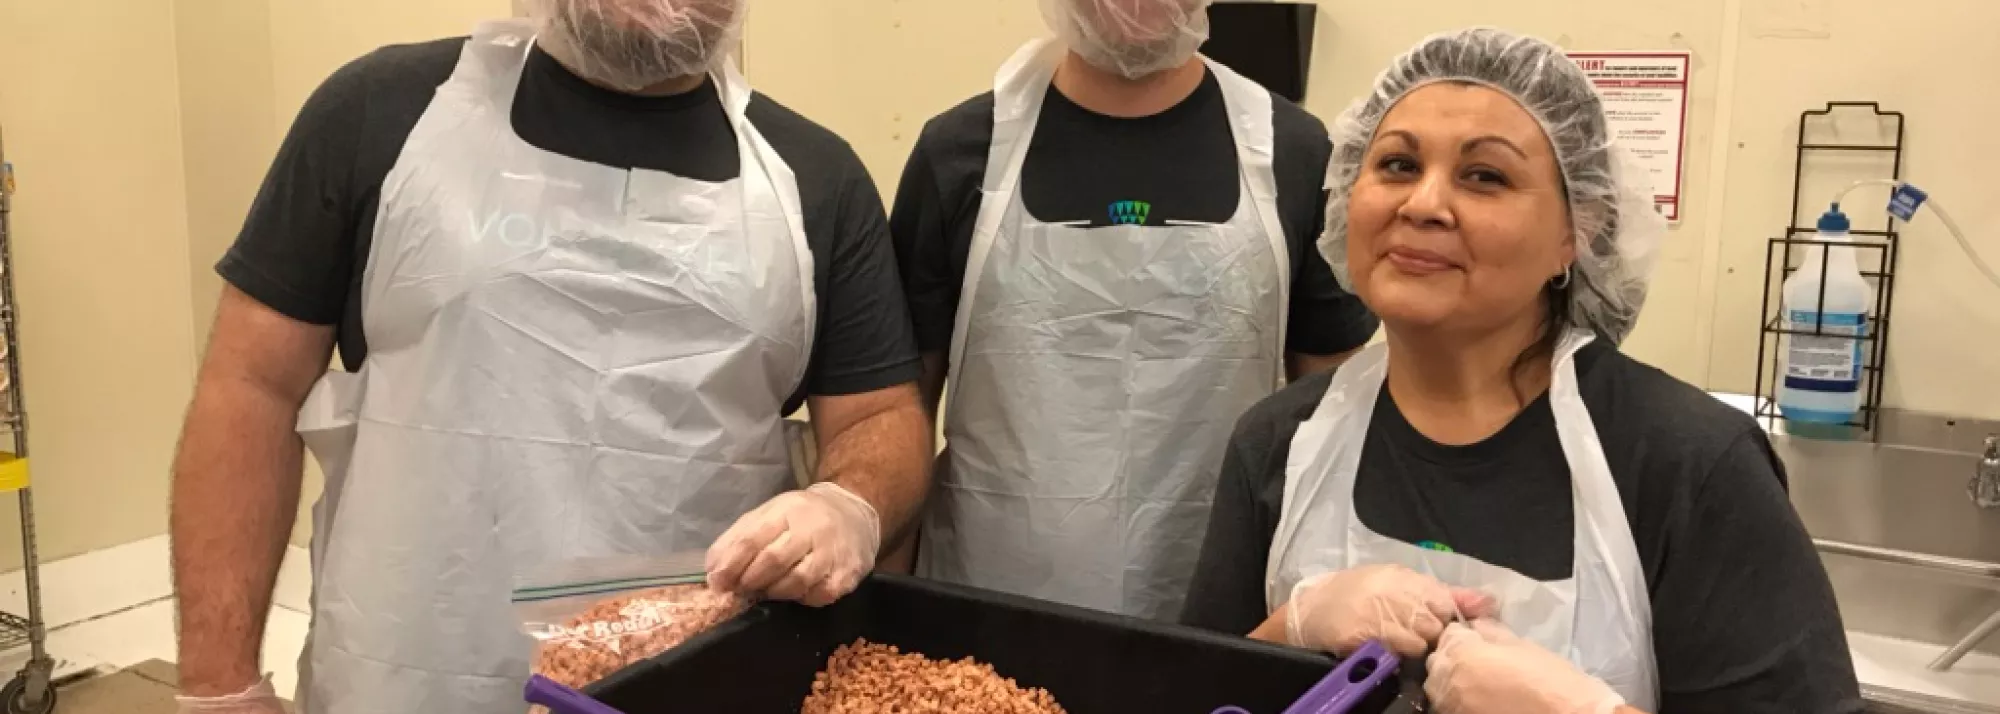 Three Lineage volunteers pose for a photo while scooping pepperoni at a food bank